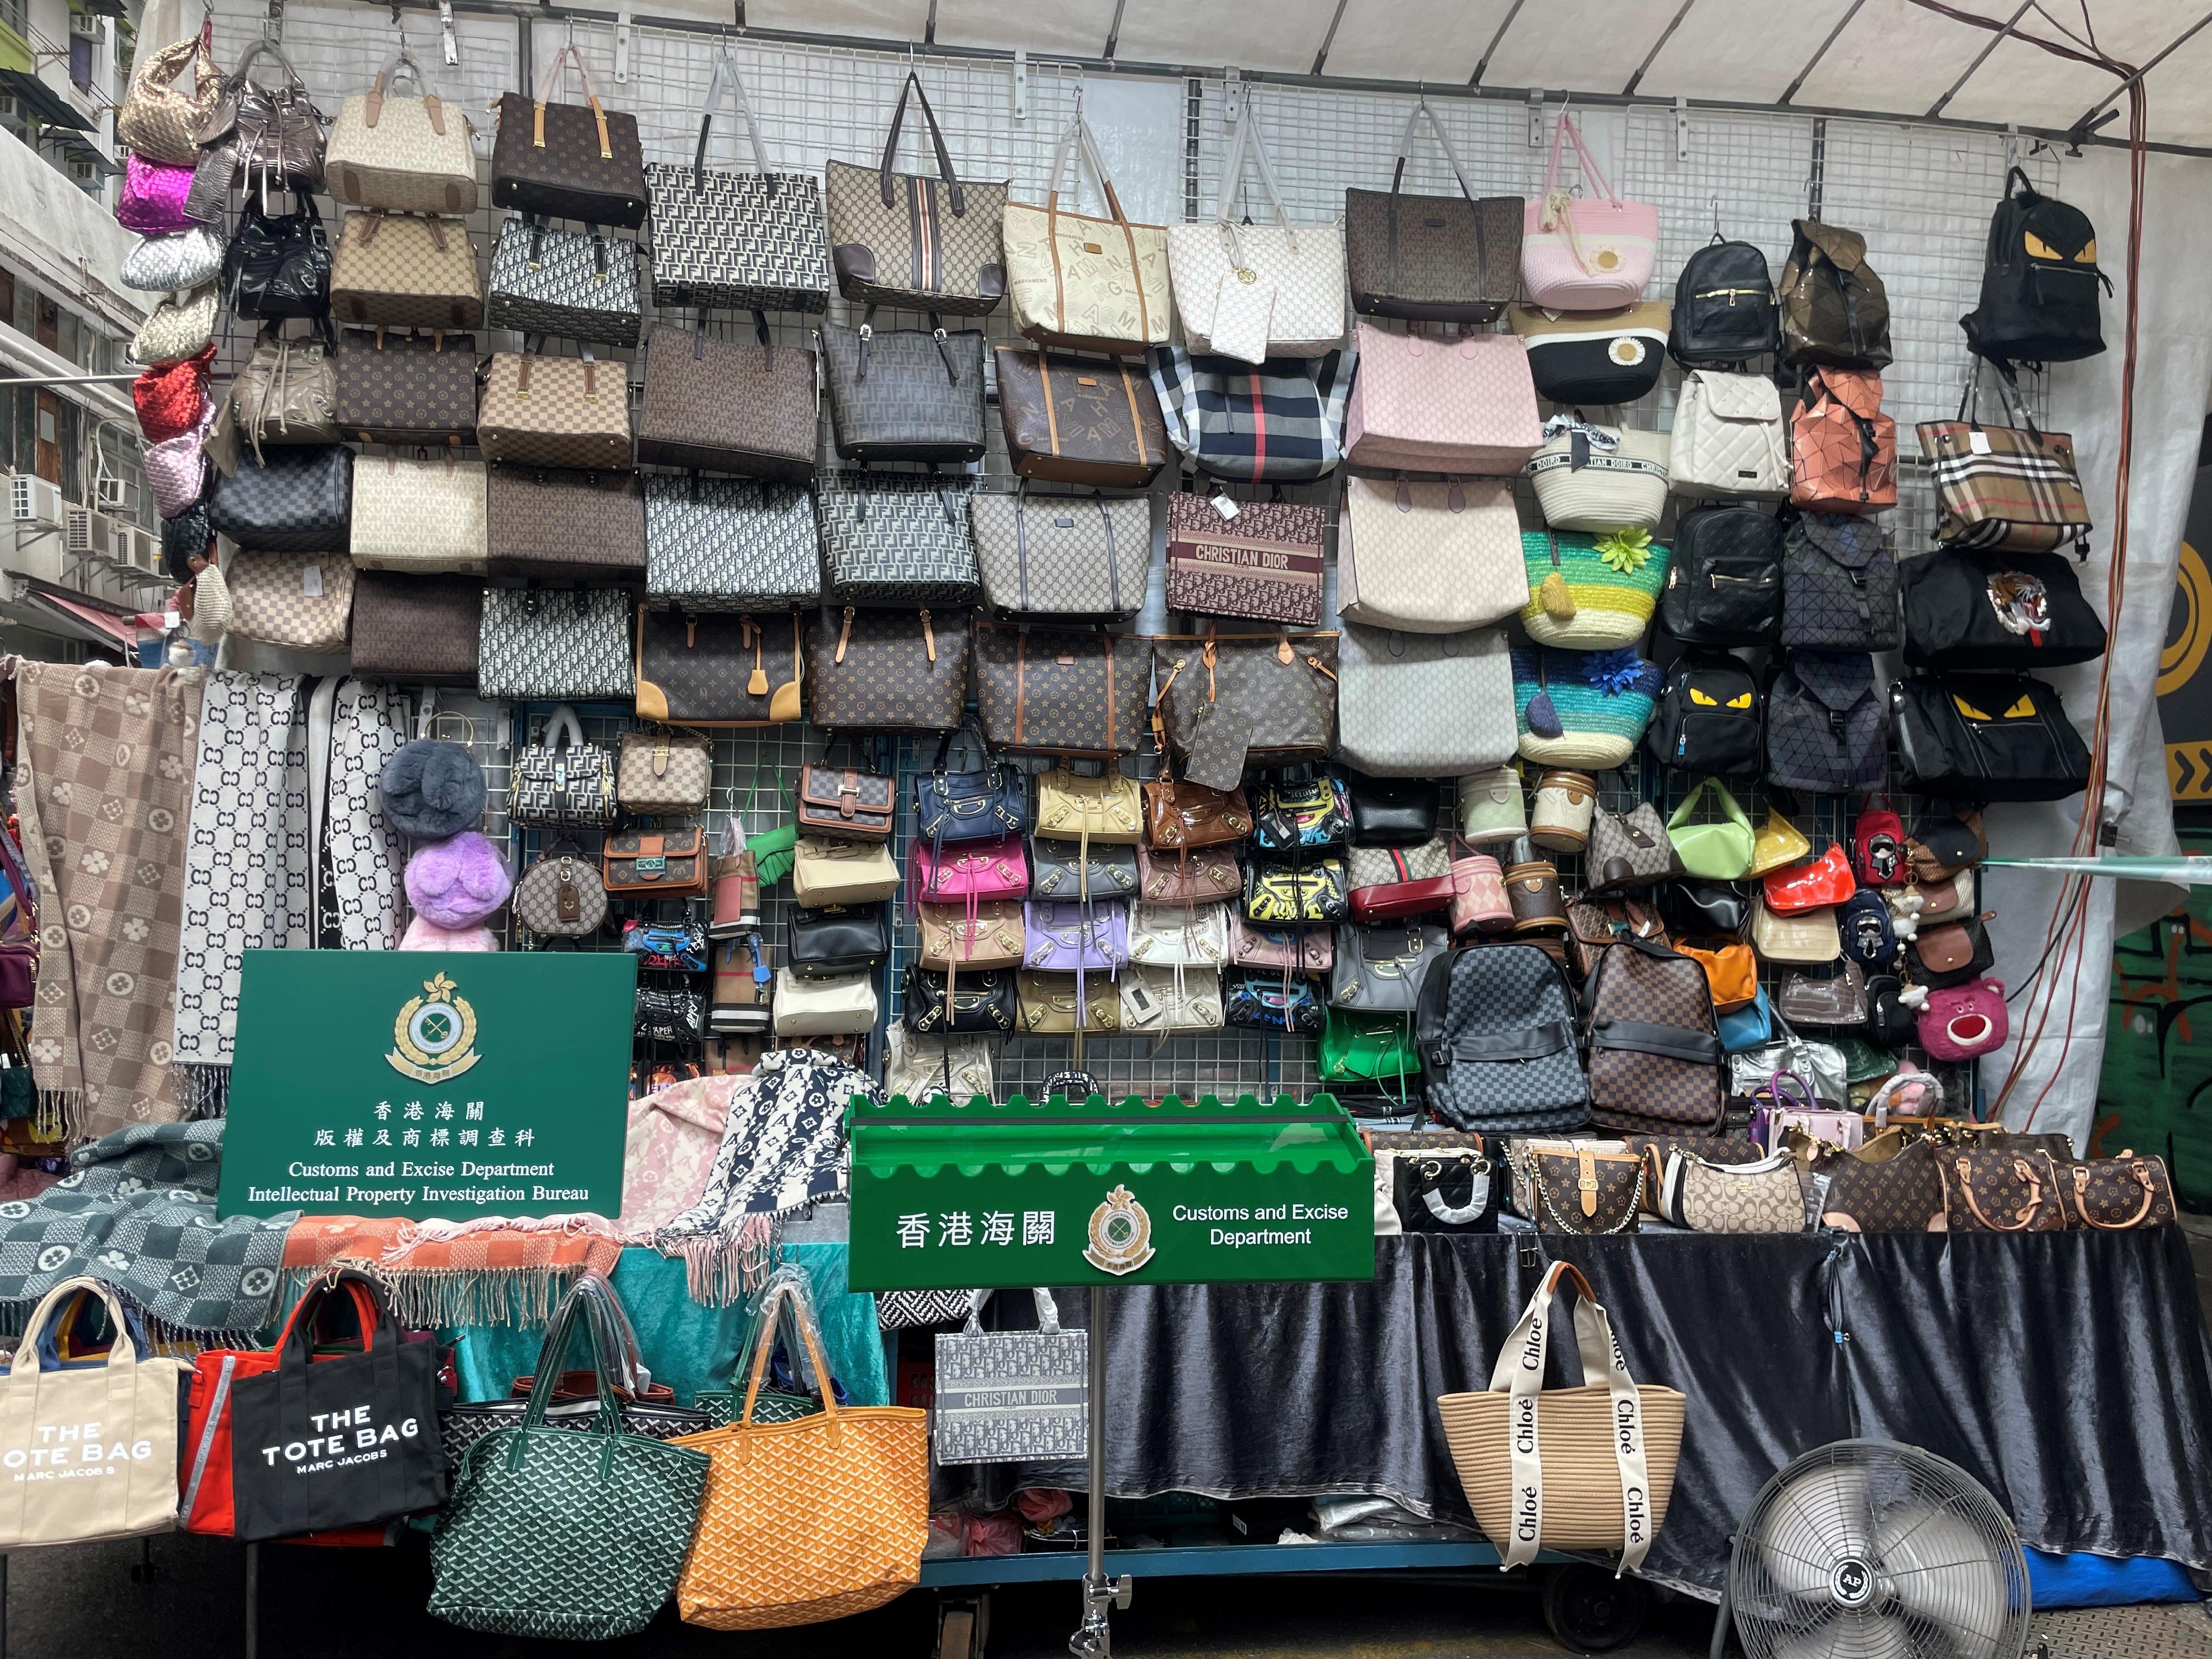 Hong Kong Customs today (September 27) conducted a special operation in Mong Kok to combat the sale of counterfeit goods and seized about 2 000 items of suspected counterfeit goods, including handbags, leather goods and mobile phone accessories, with an estimated market value of about $300,000. Photo shows some of the suspected counterfeit goods seized by Customs officers at a fixed-pitch hawker stall in Mong Kok.